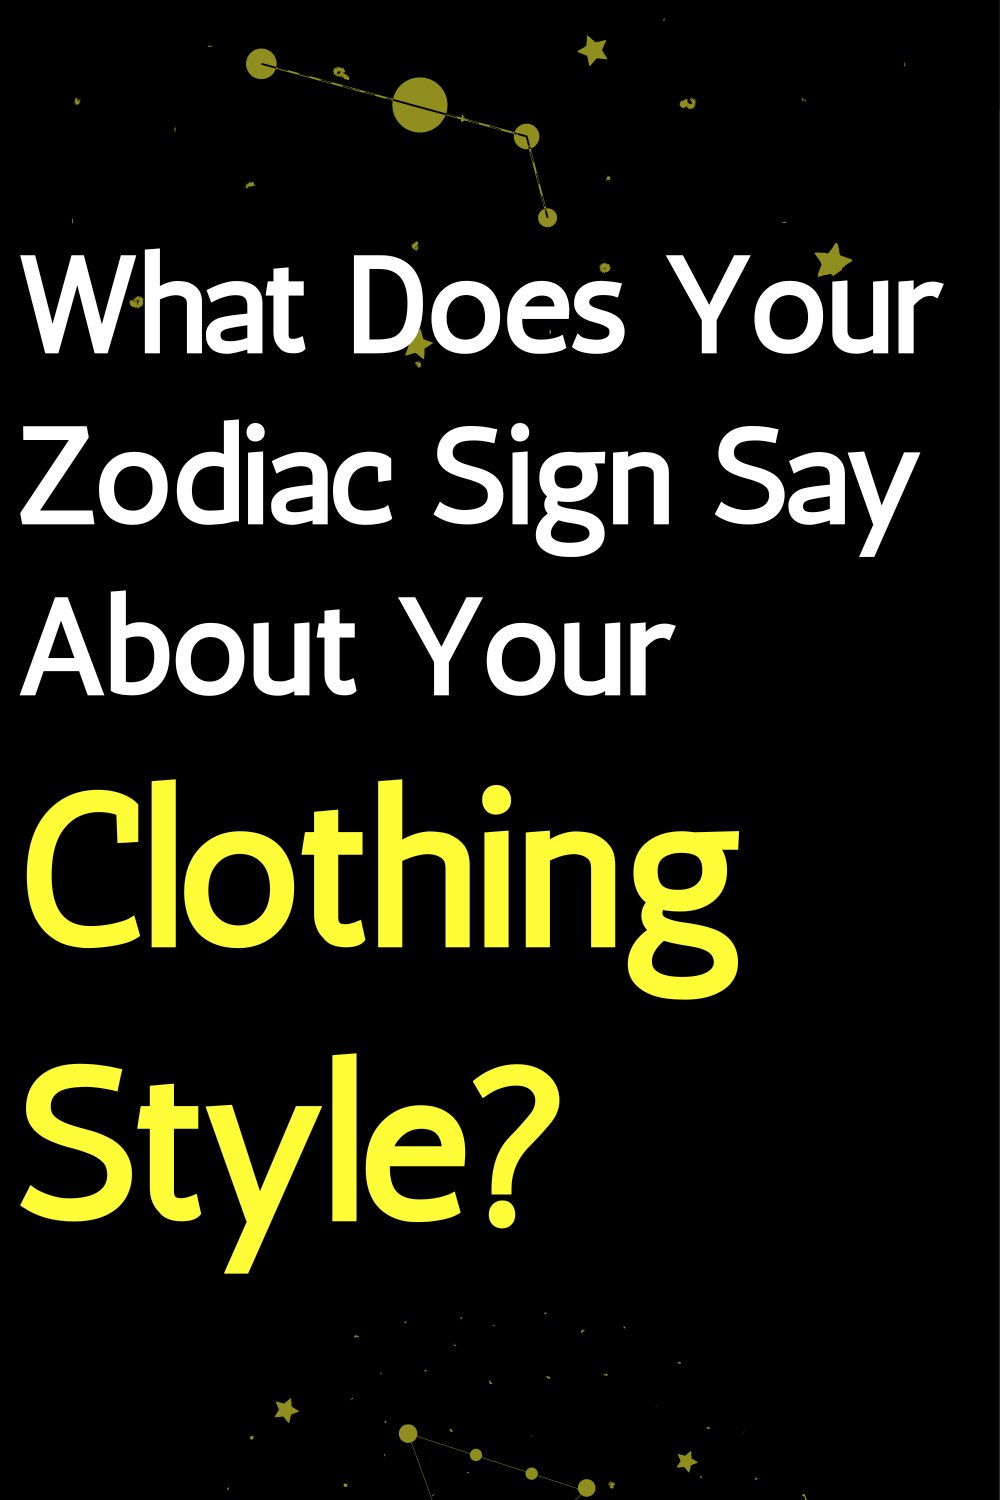 What Does Your Zodiac Sign Say About Your Clothing Style?